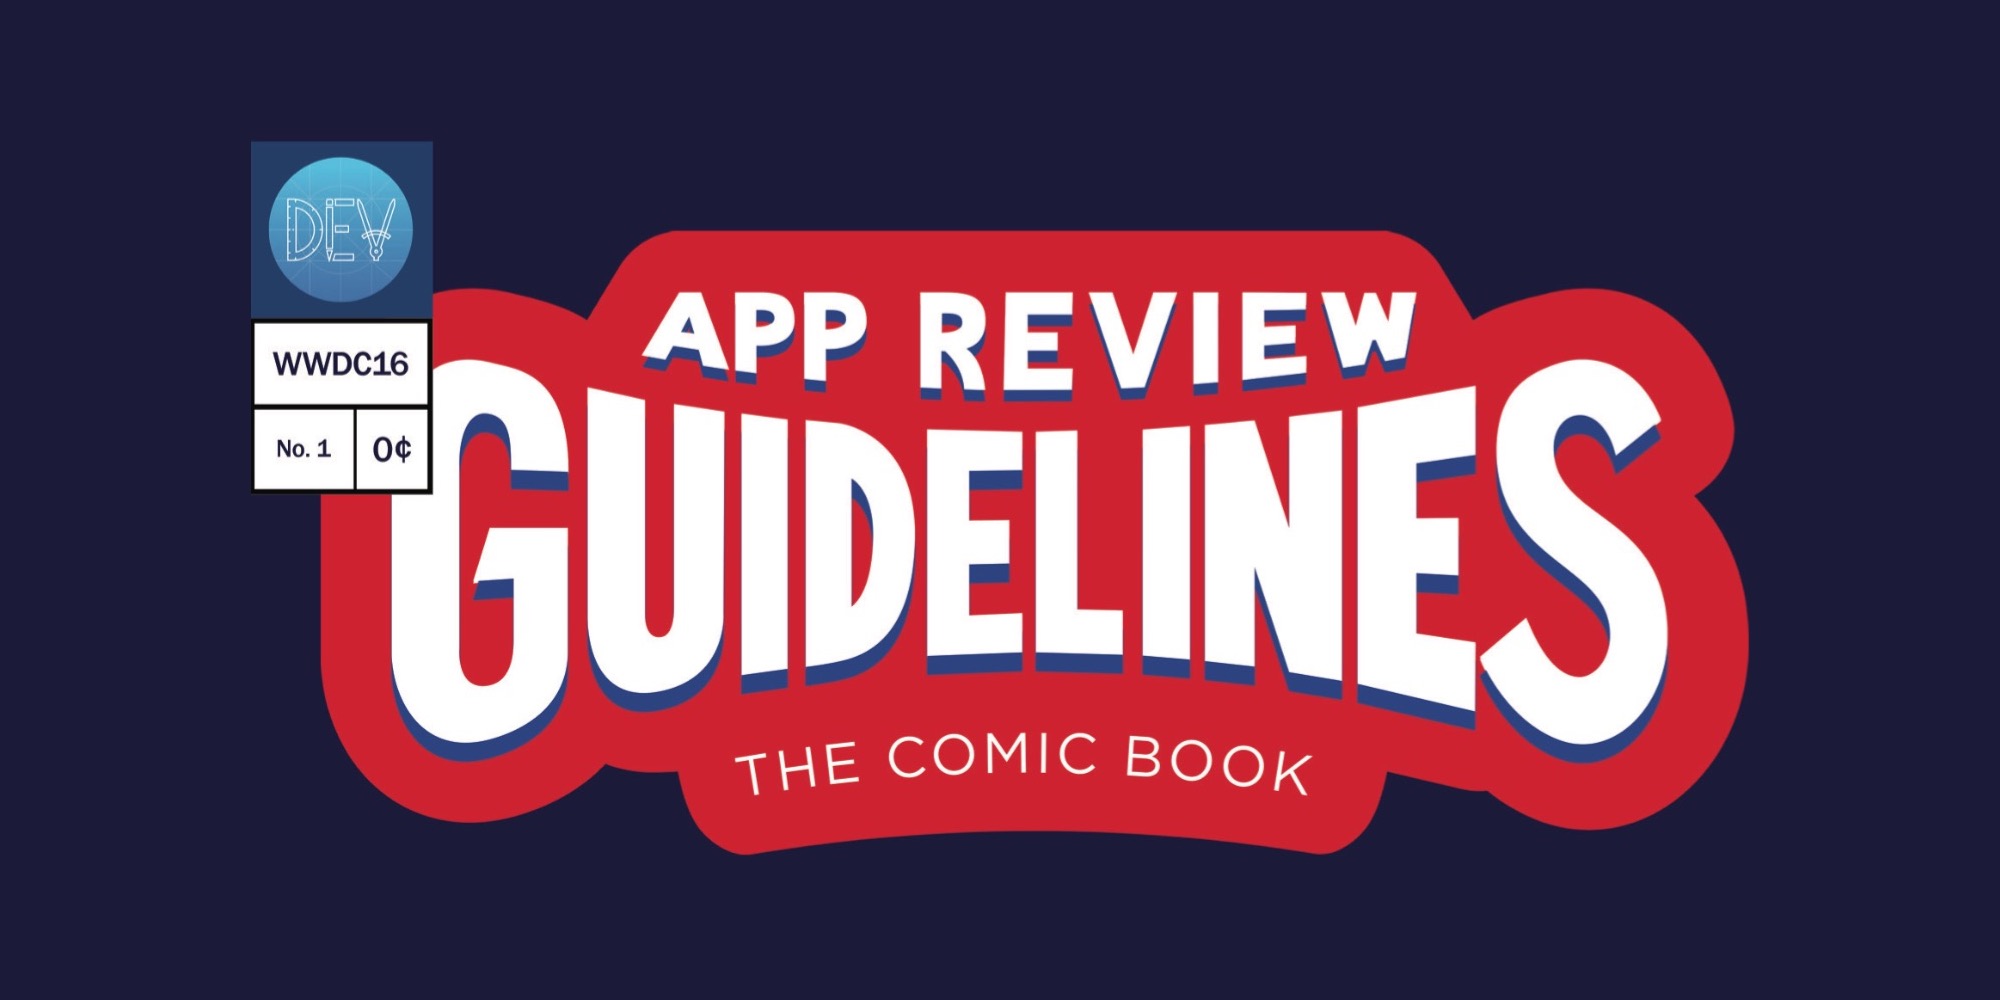 App Review Guidelines Comic Book